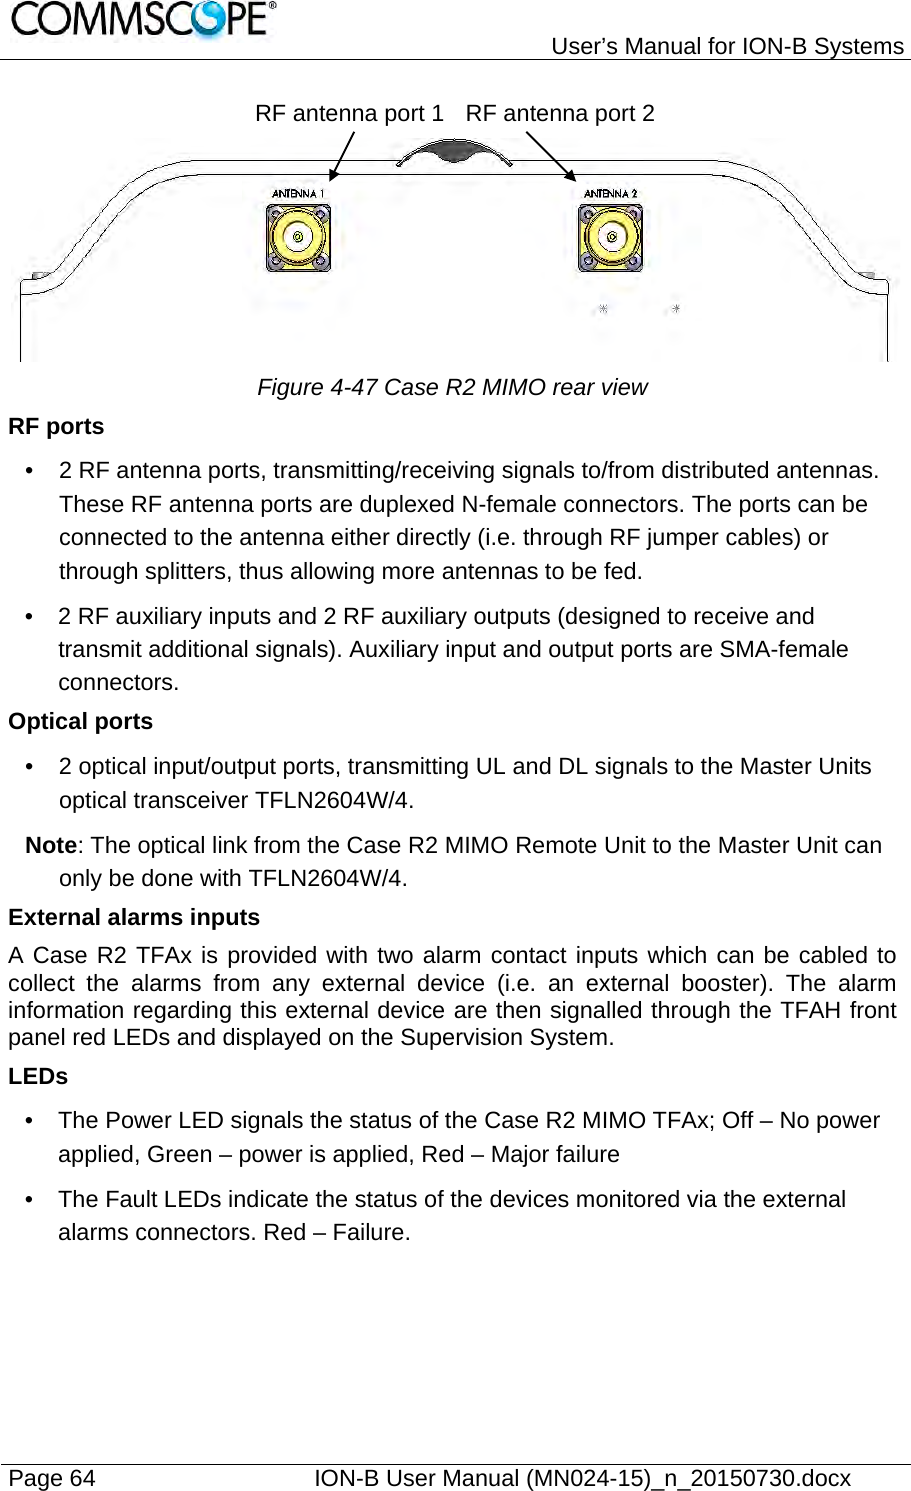   User’s Manual for ION-B Systems Page 64    ION-B User Manual (MN024-15)_n_20150730.docx  RF antenna port 1 RF antenna port 2 Figure 4-47 Case R2 MIMO rear view RF ports •  2 RF antenna ports, transmitting/receiving signals to/from distributed antennas. These RF antenna ports are duplexed N-female connectors. The ports can be connected to the antenna either directly (i.e. through RF jumper cables) or through splitters, thus allowing more antennas to be fed. •  2 RF auxiliary inputs and 2 RF auxiliary outputs (designed to receive and transmit additional signals). Auxiliary input and output ports are SMA-female connectors. Optical ports •  2 optical input/output ports, transmitting UL and DL signals to the Master Units optical transceiver TFLN2604W/4. Note: The optical link from the Case R2 MIMO Remote Unit to the Master Unit can only be done with TFLN2604W/4. External alarms inputs A Case R2 TFAx is provided with two alarm contact inputs which can be cabled to collect the alarms from any external device (i.e. an external booster). The alarm information regarding this external device are then signalled through the TFAH front panel red LEDs and displayed on the Supervision System. LEDs •  The Power LED signals the status of the Case R2 MIMO TFAx; Off – No power applied, Green – power is applied, Red – Major failure •  The Fault LEDs indicate the status of the devices monitored via the external alarms connectors. Red – Failure. 